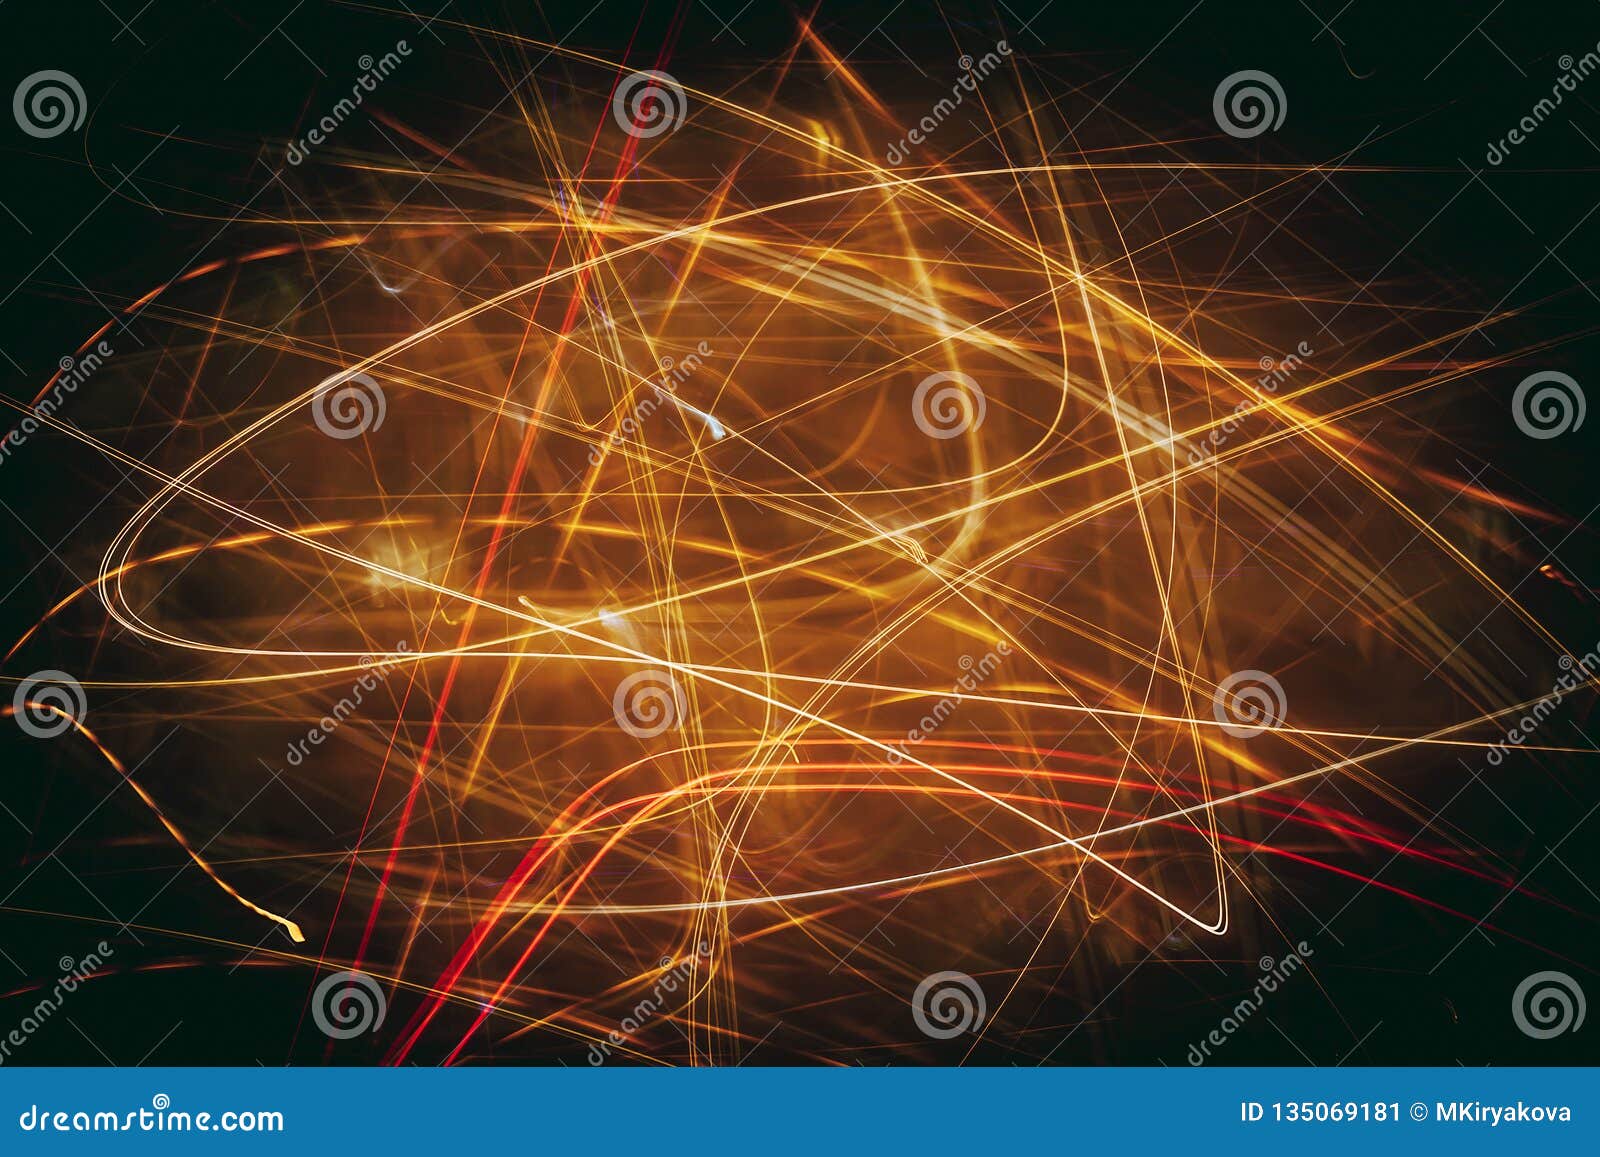 Golden Speed Lines. Festive Concept. Stock Image - Image of fairy ...